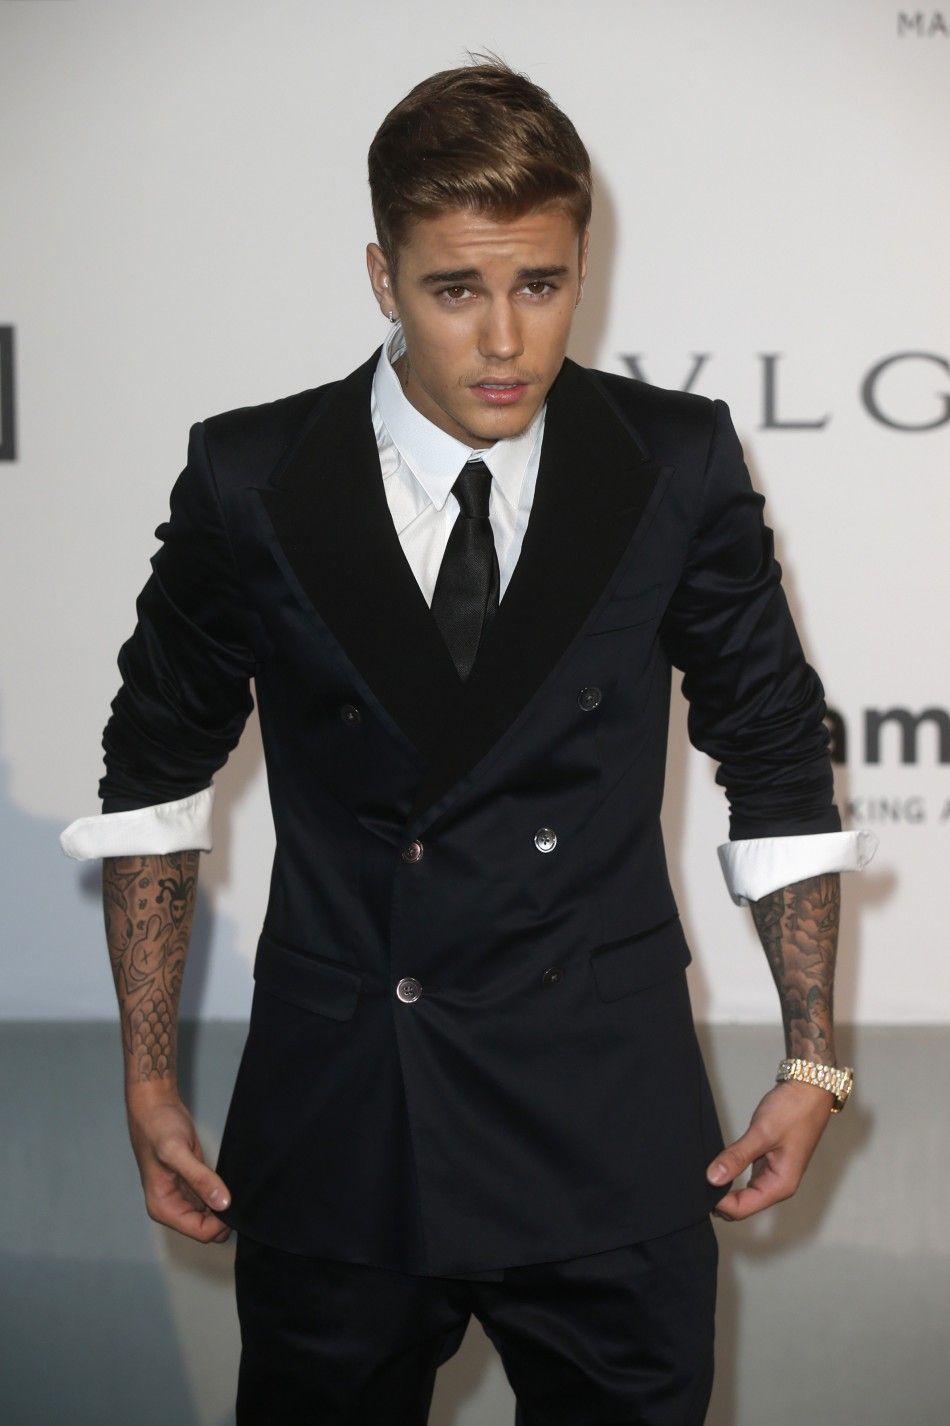 Canadian pop singer Justin Bieber arrives for amfARs Cinema Against AIDS 2014 event in Antibes during the 67th Cannes Film Festival May 22, 2014. REUTERSBenoit Tessier